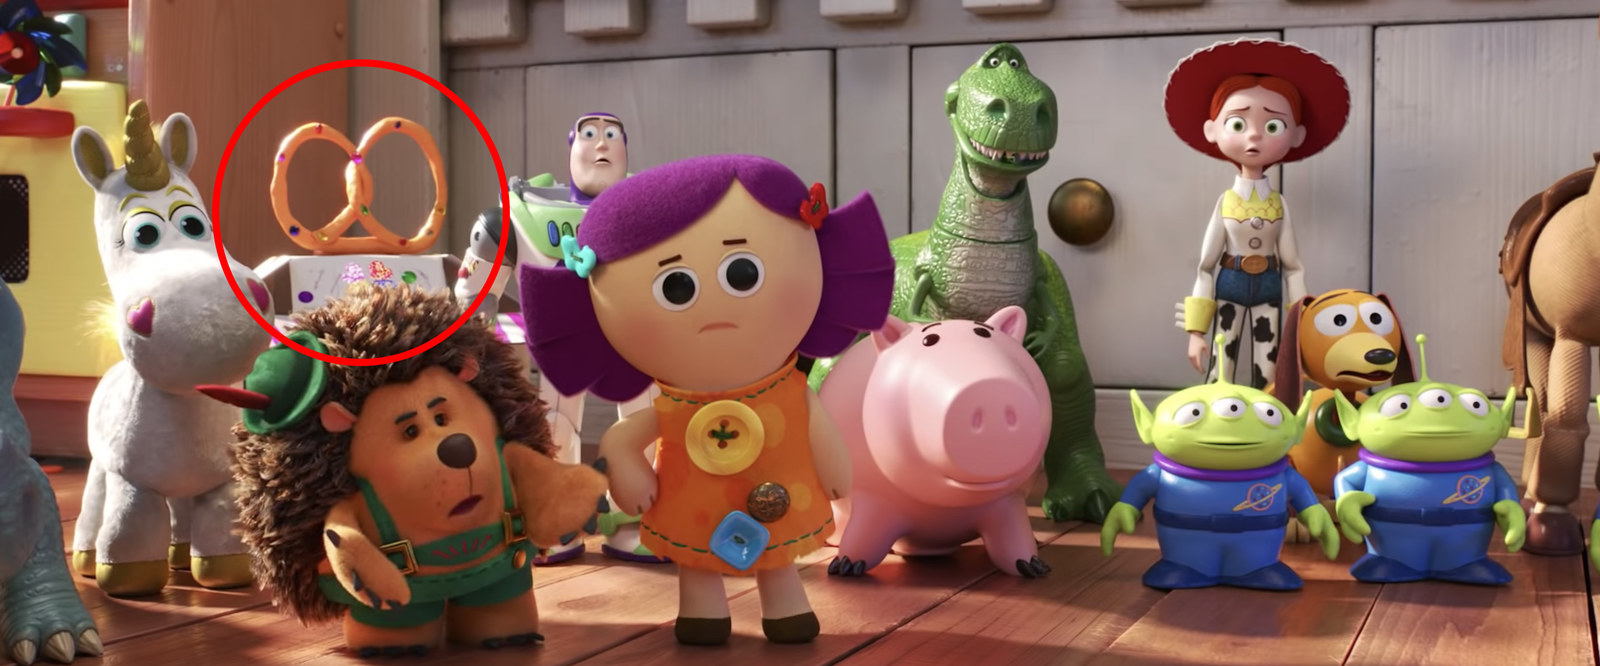 Toy Story 4' trailer has every parent crying about toy attachments